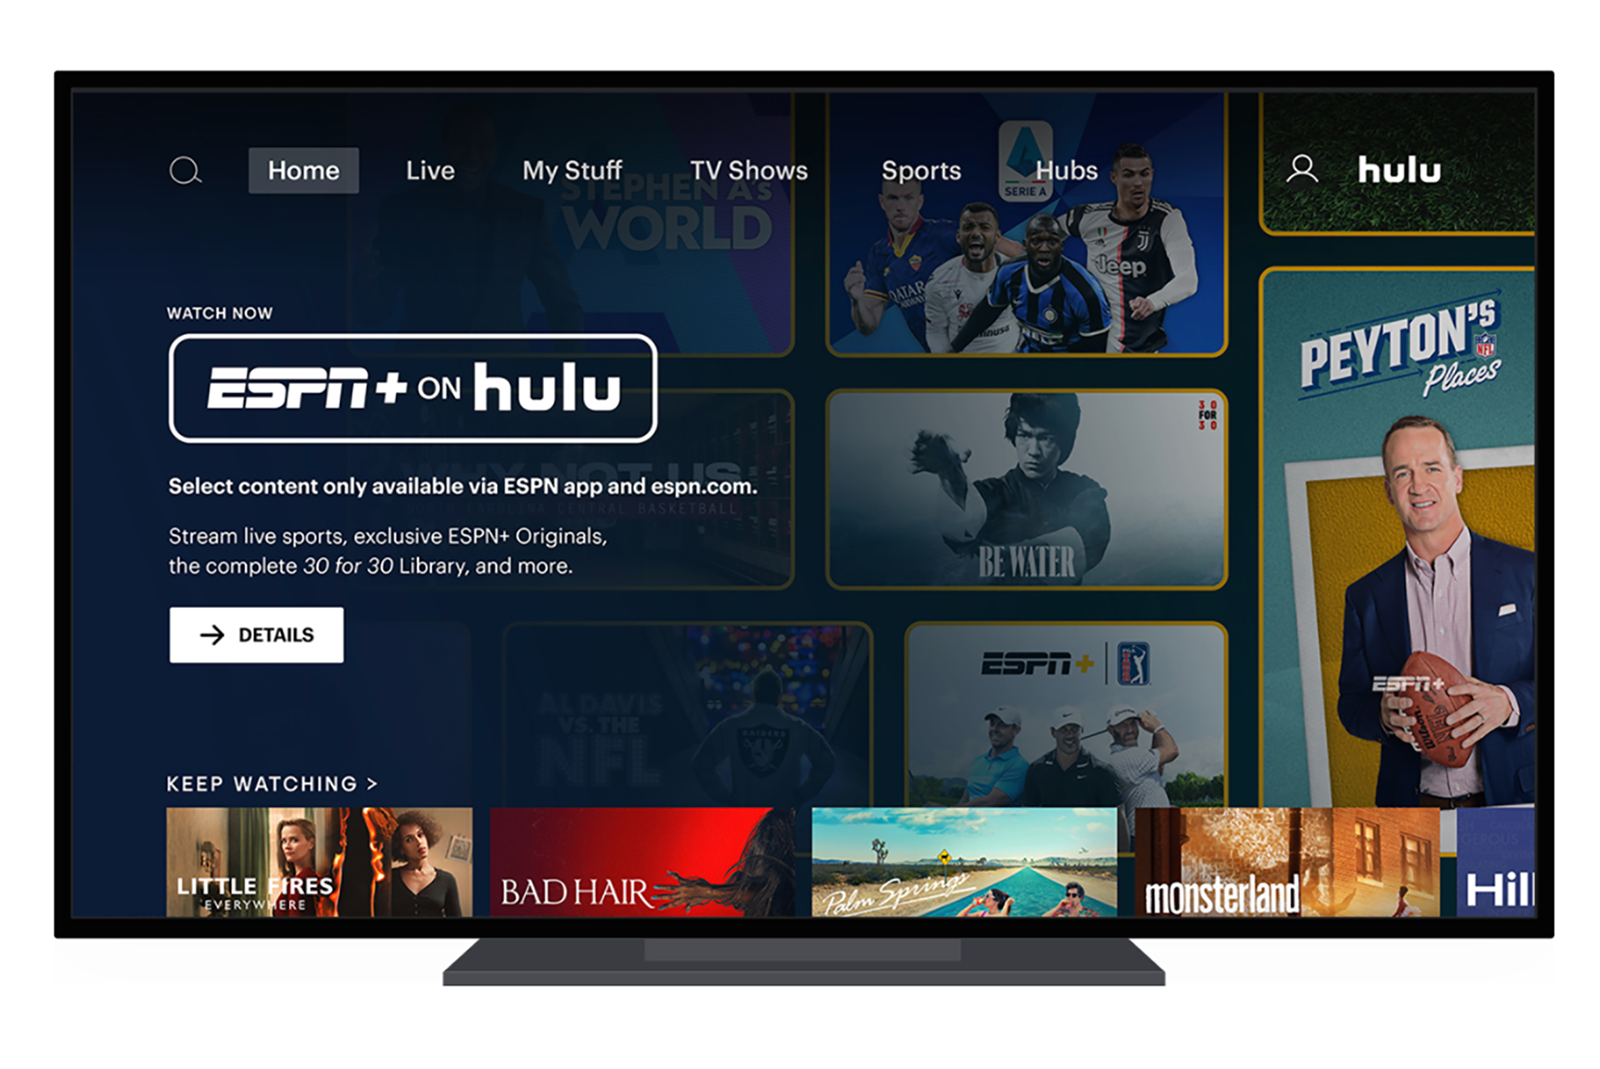 You can now watch ESPN+ live sports and originals directly through Hulu photo 1